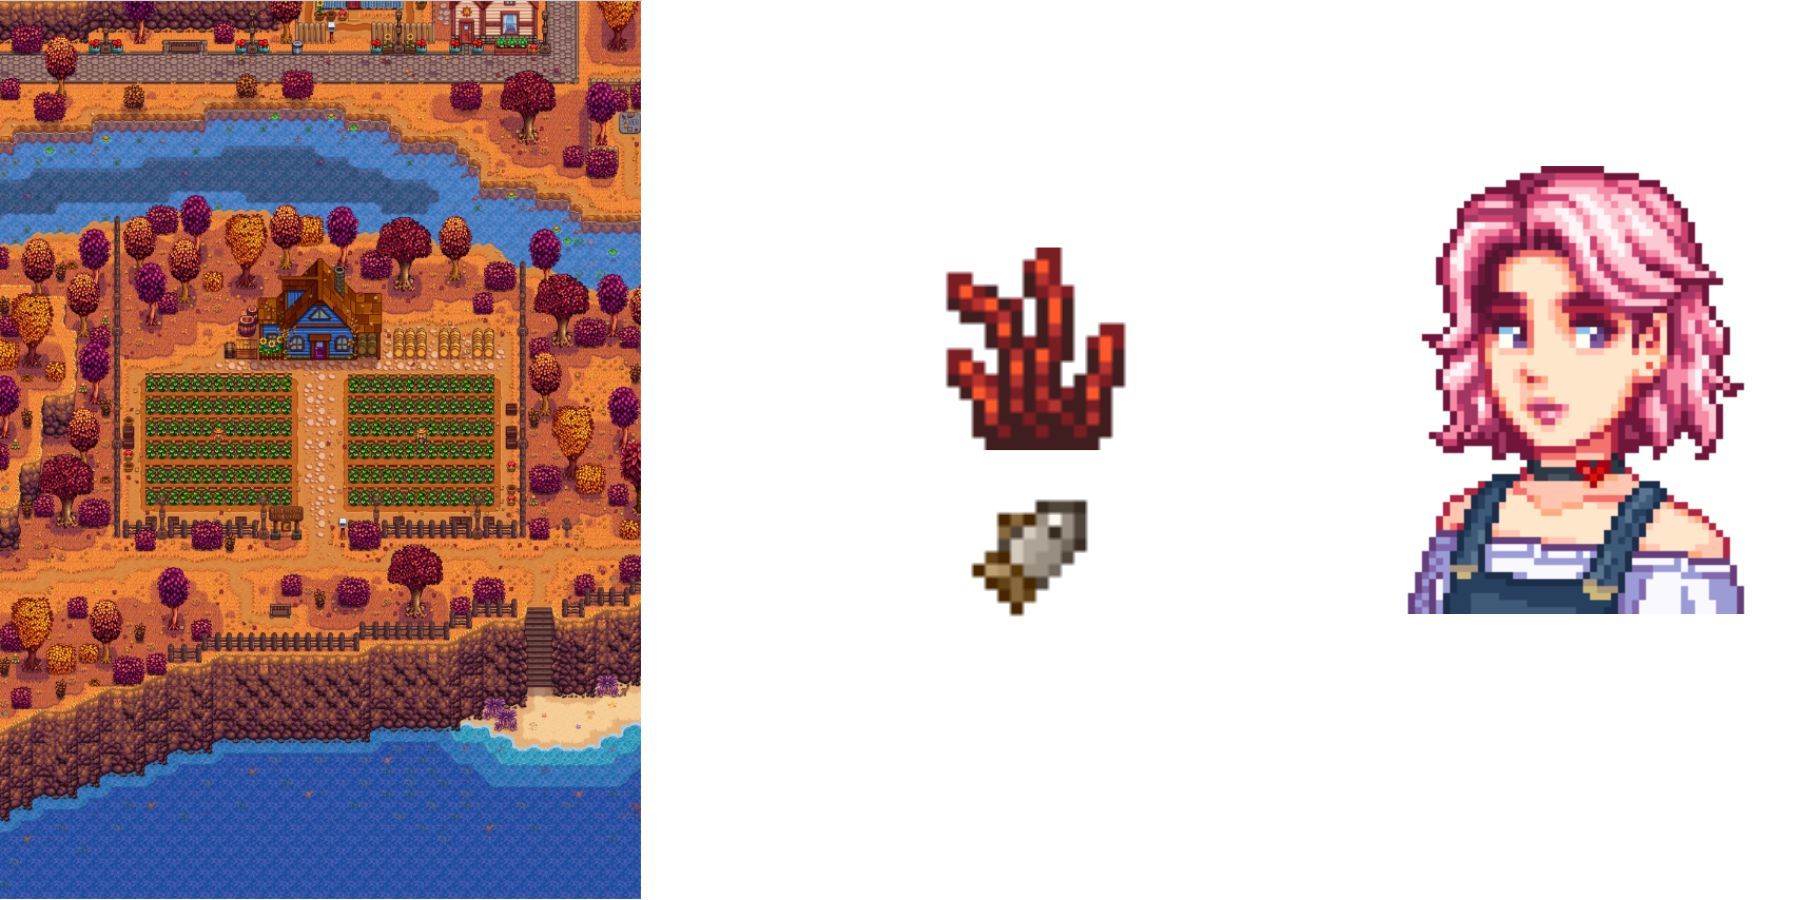 stardew valley expanded blue moon vineyard new fish